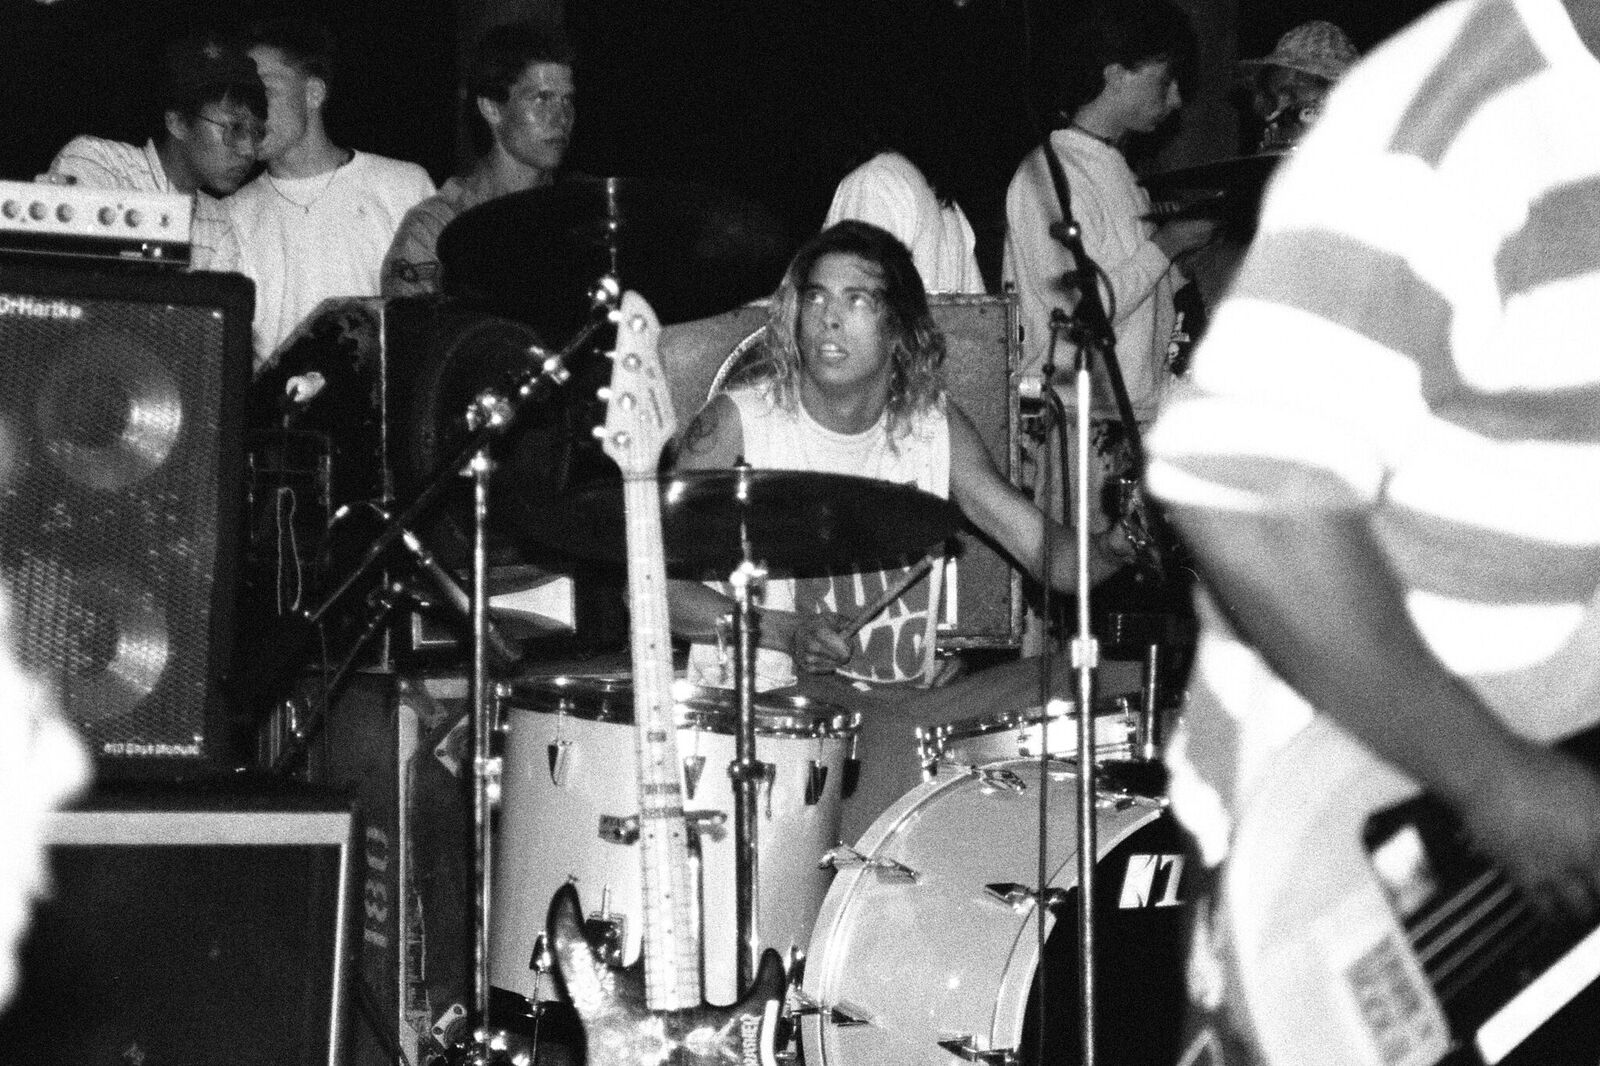 Bands, including D.C.'s Scream, featuring drummer Dave Grohl, performed concerts on the skate ramp at CCCC. (Courtesy Mike Maniglia)